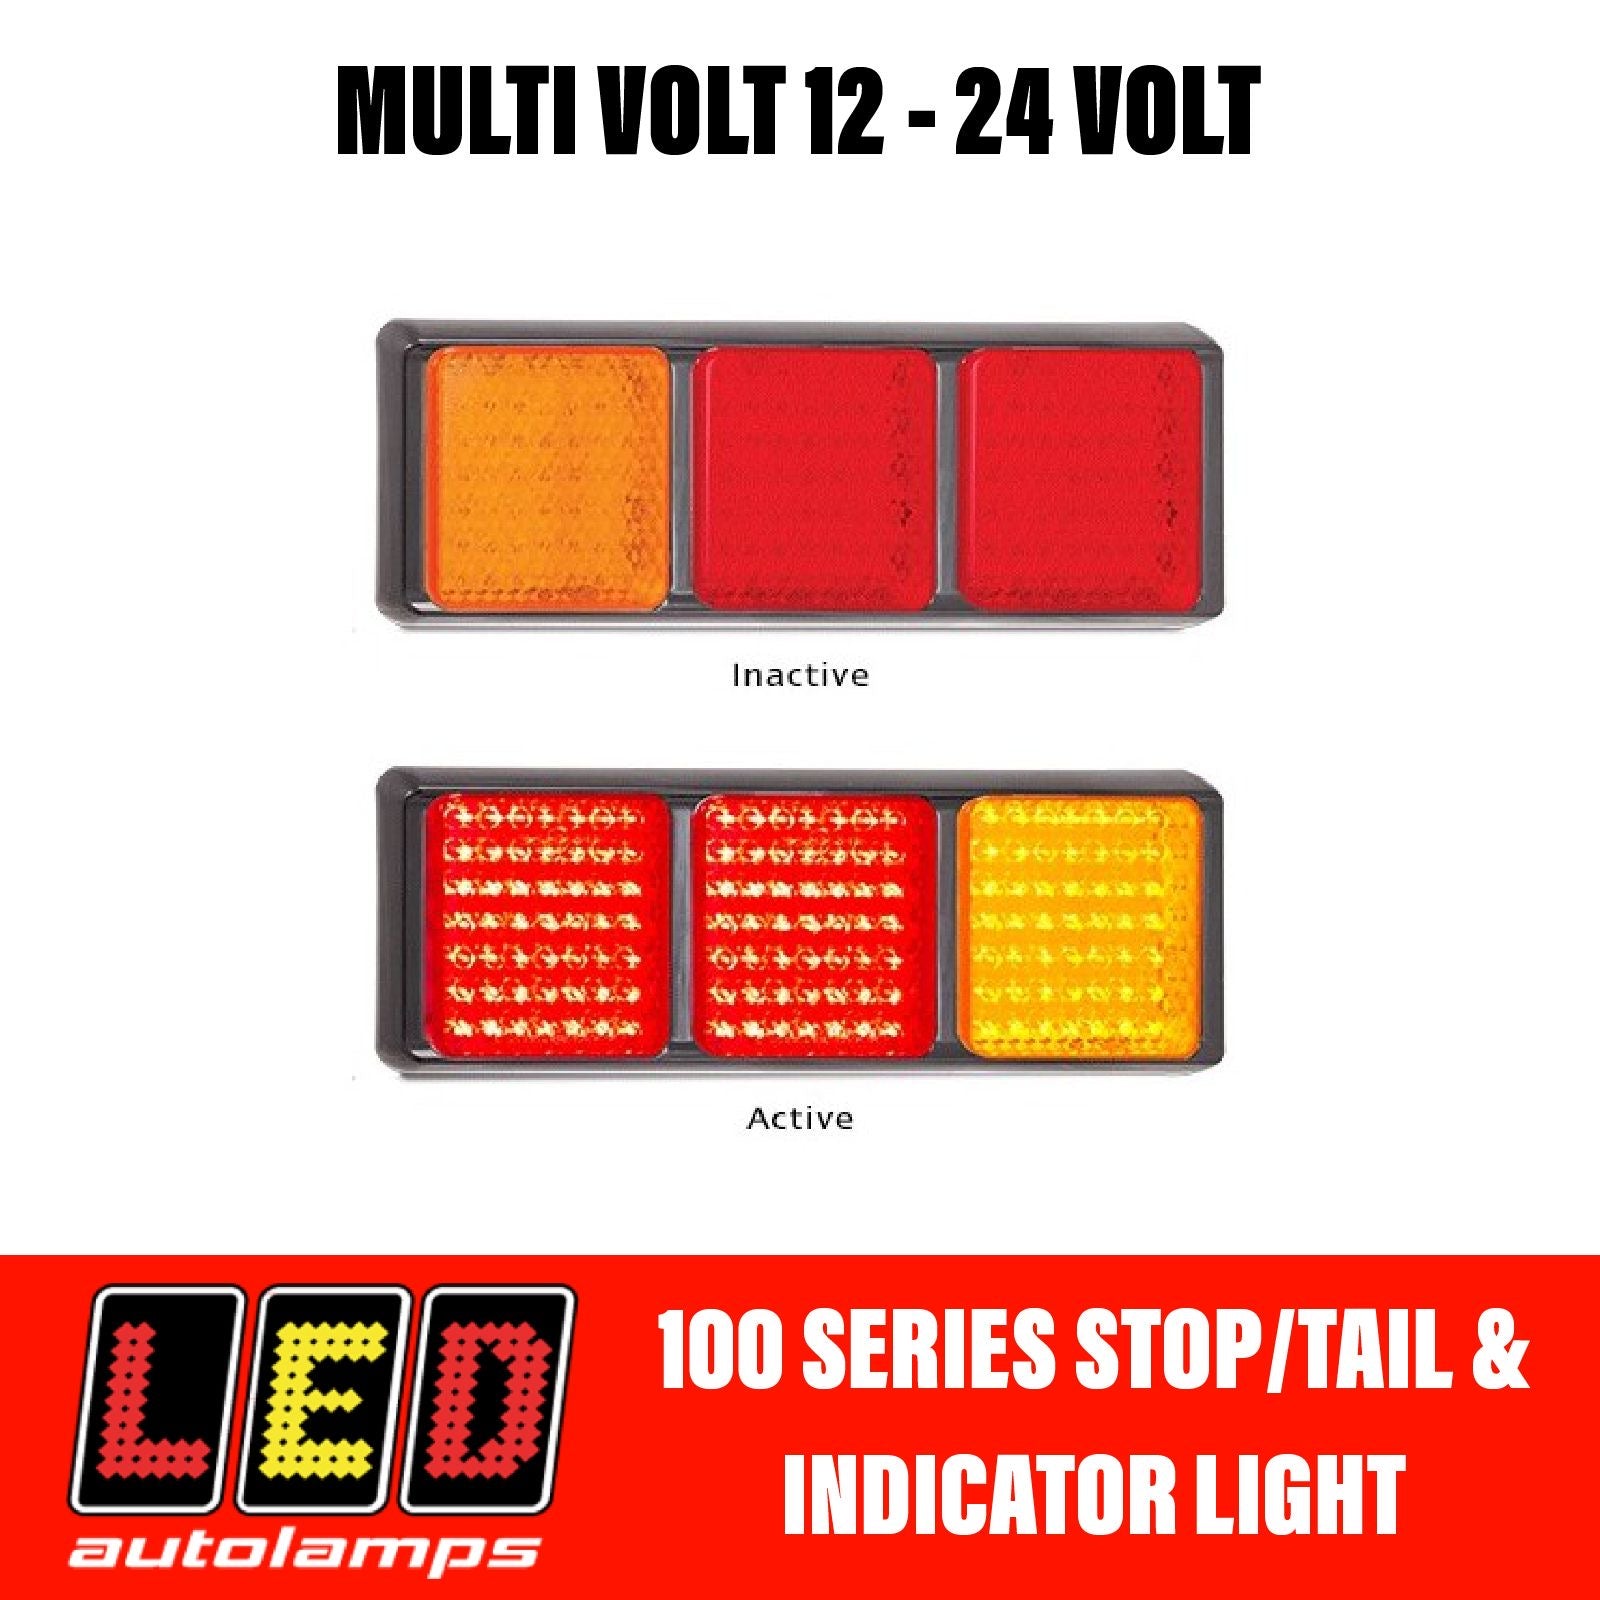 LED Autolamps 125 Series Stop/Tail and Indicator LED Light 5 Year Warranty